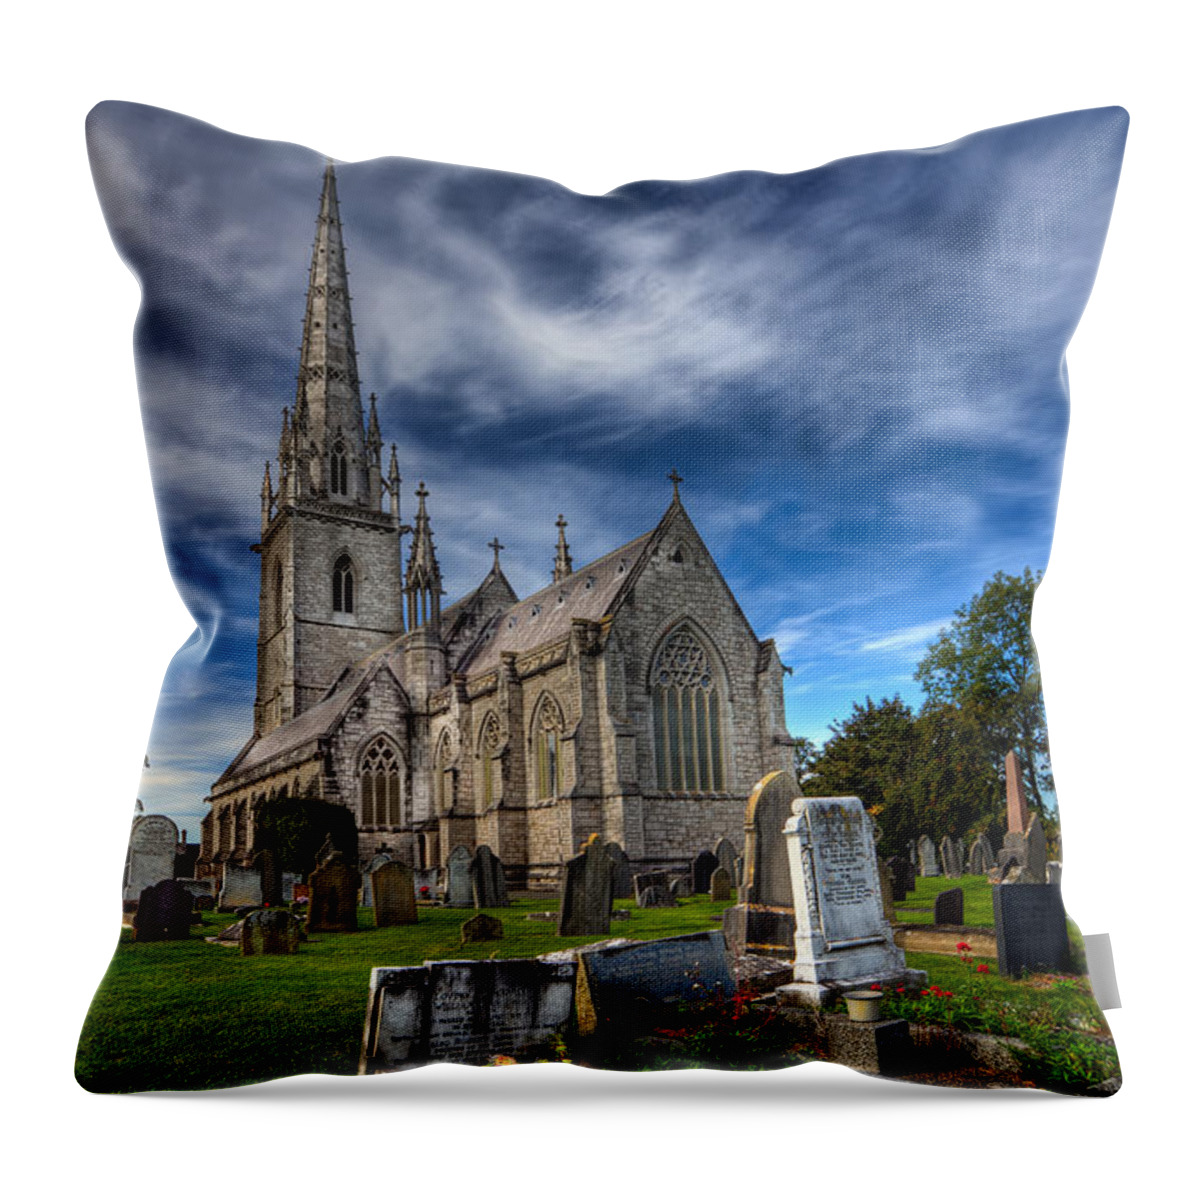 Marble Church Throw Pillow featuring the photograph Church of Marble by Adrian Evans